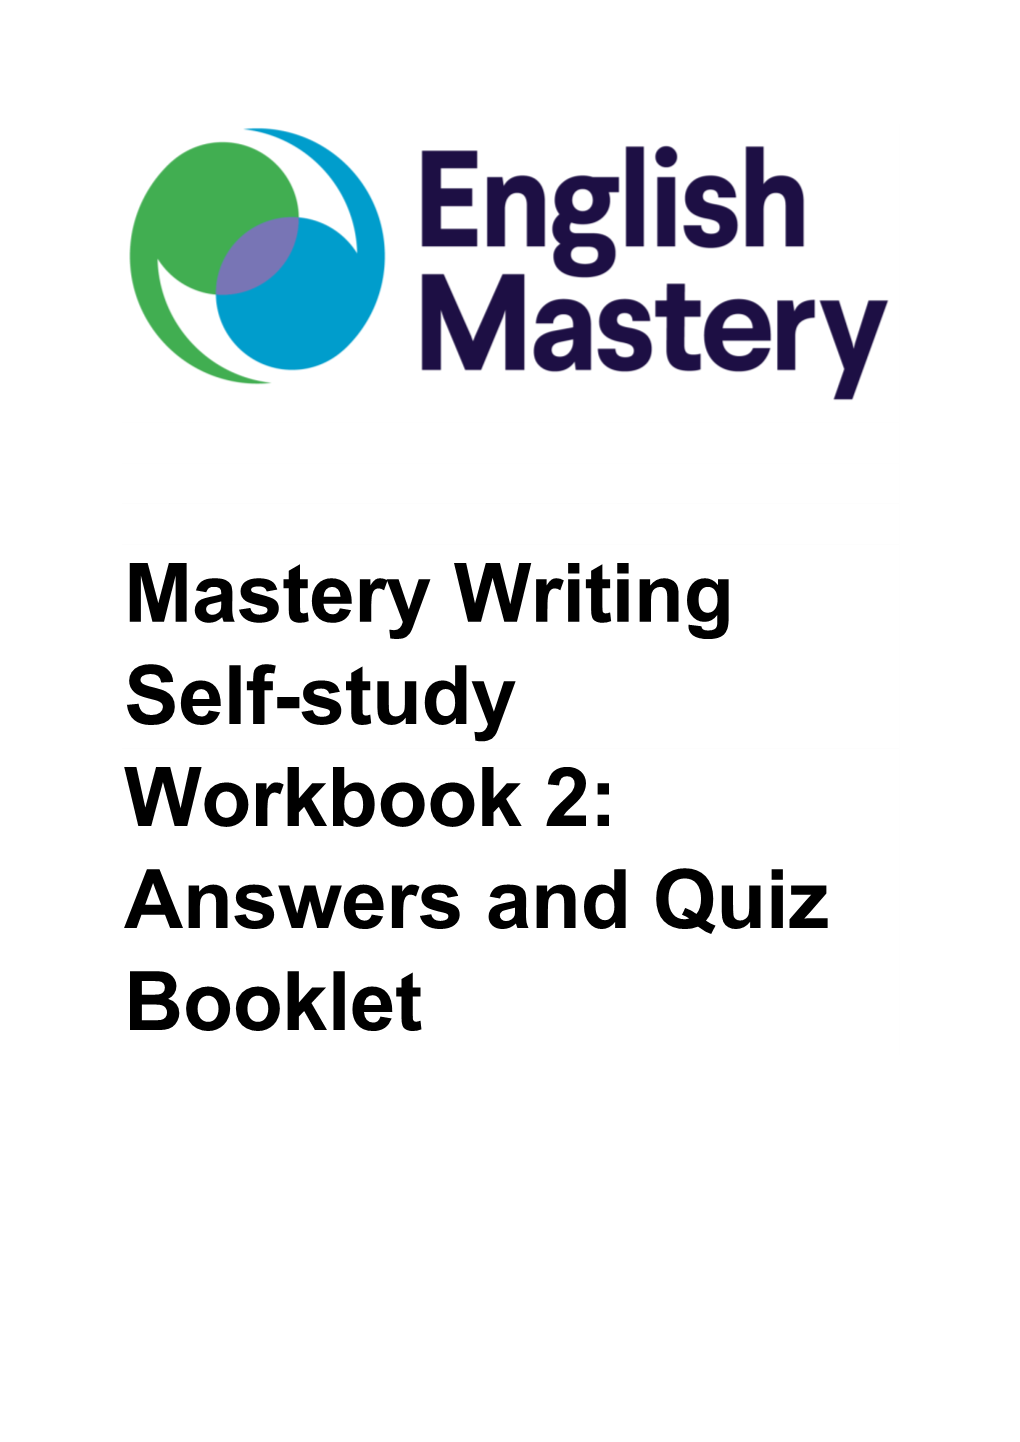 Mastery Writing Self-Study Workbook 2: Answers and Quiz Booklet